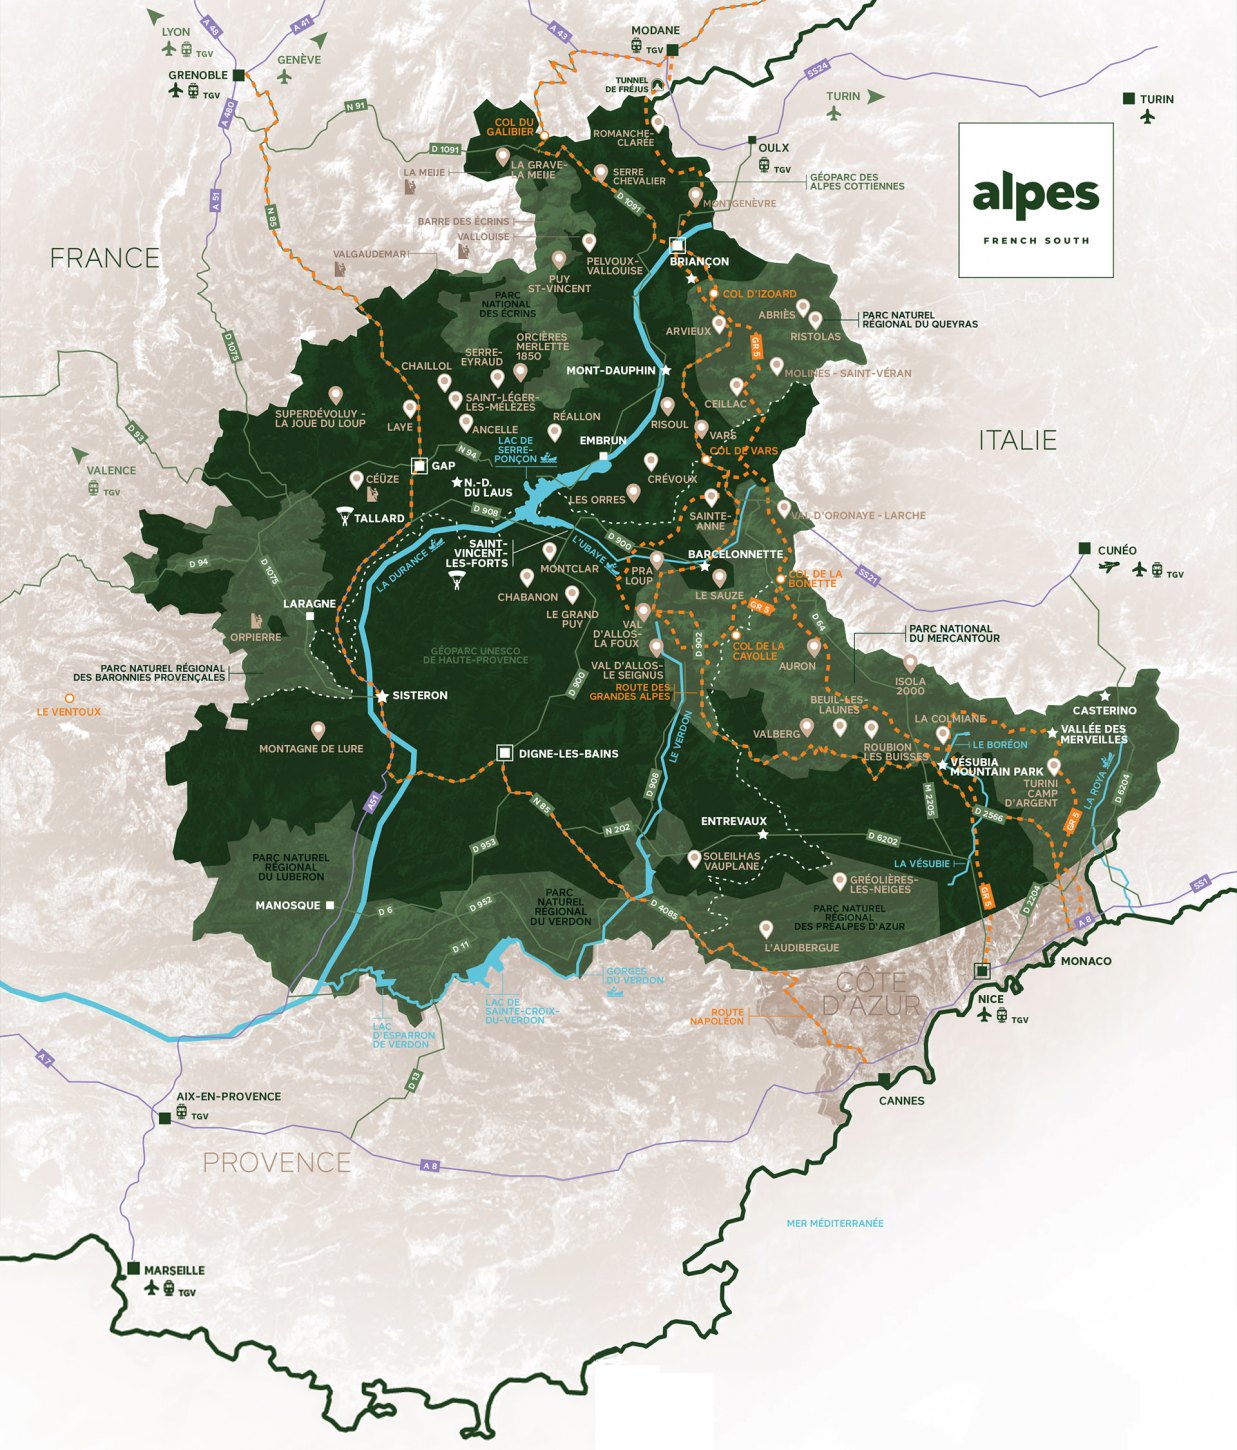 map Alpes French South purealpes 